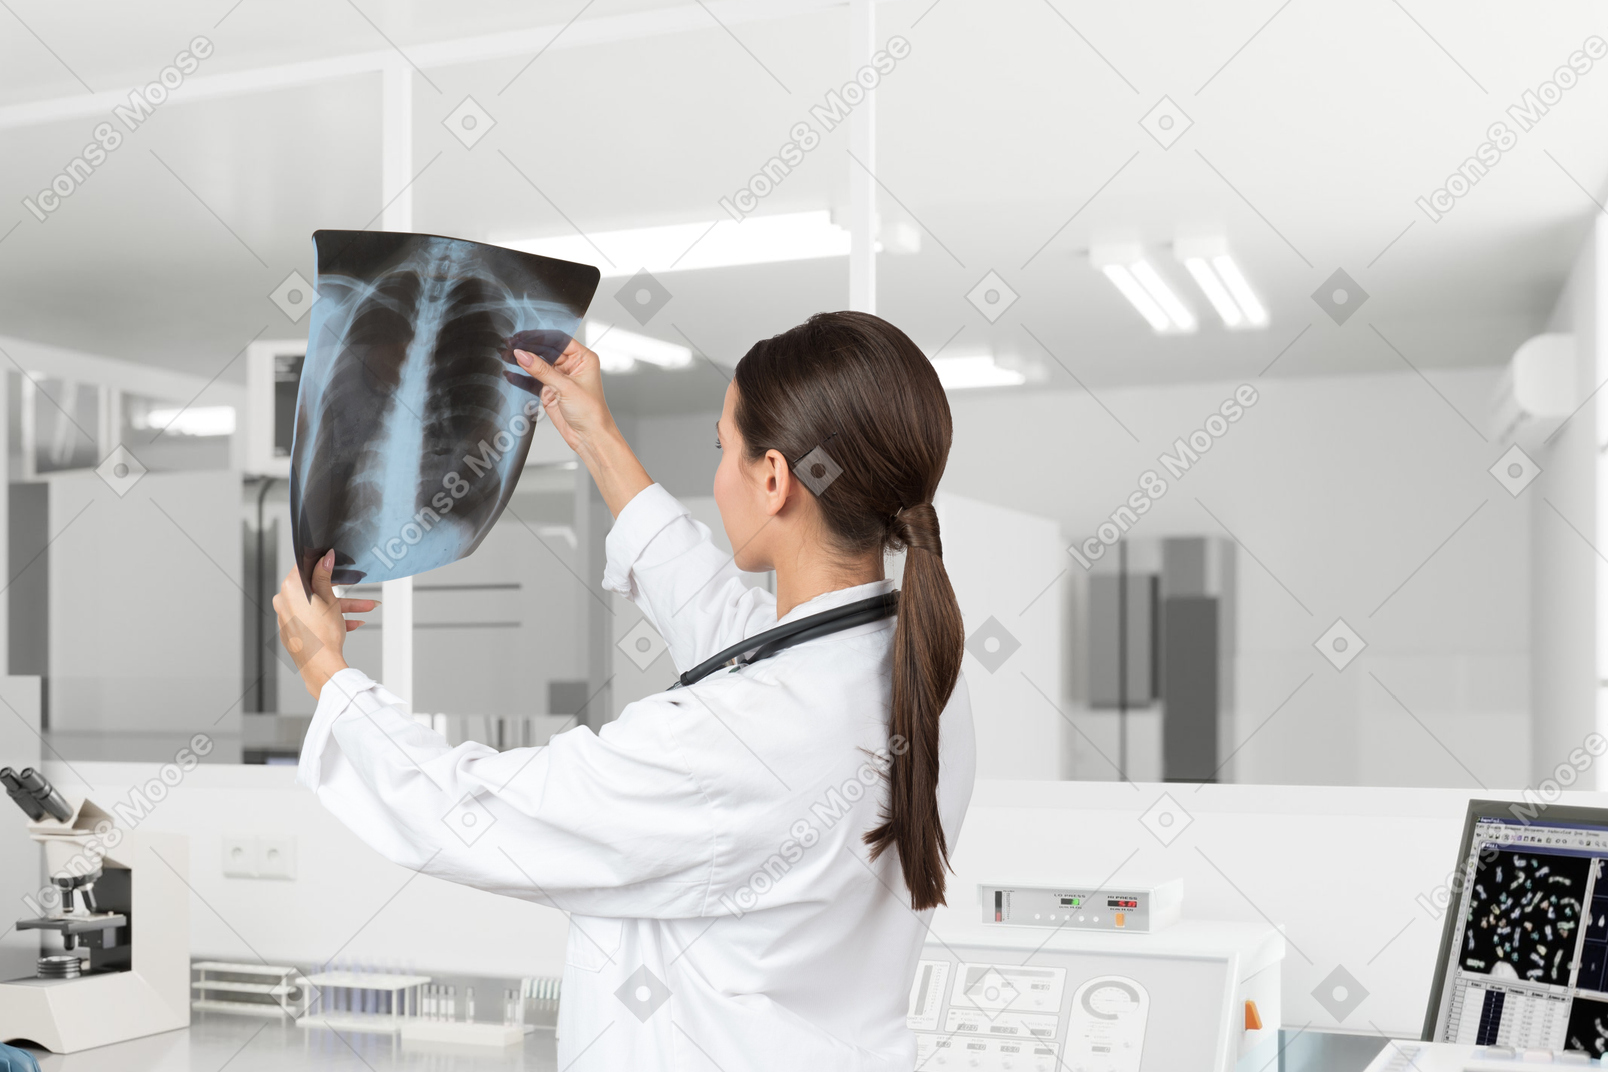 Female doctor looking at an x ray scan